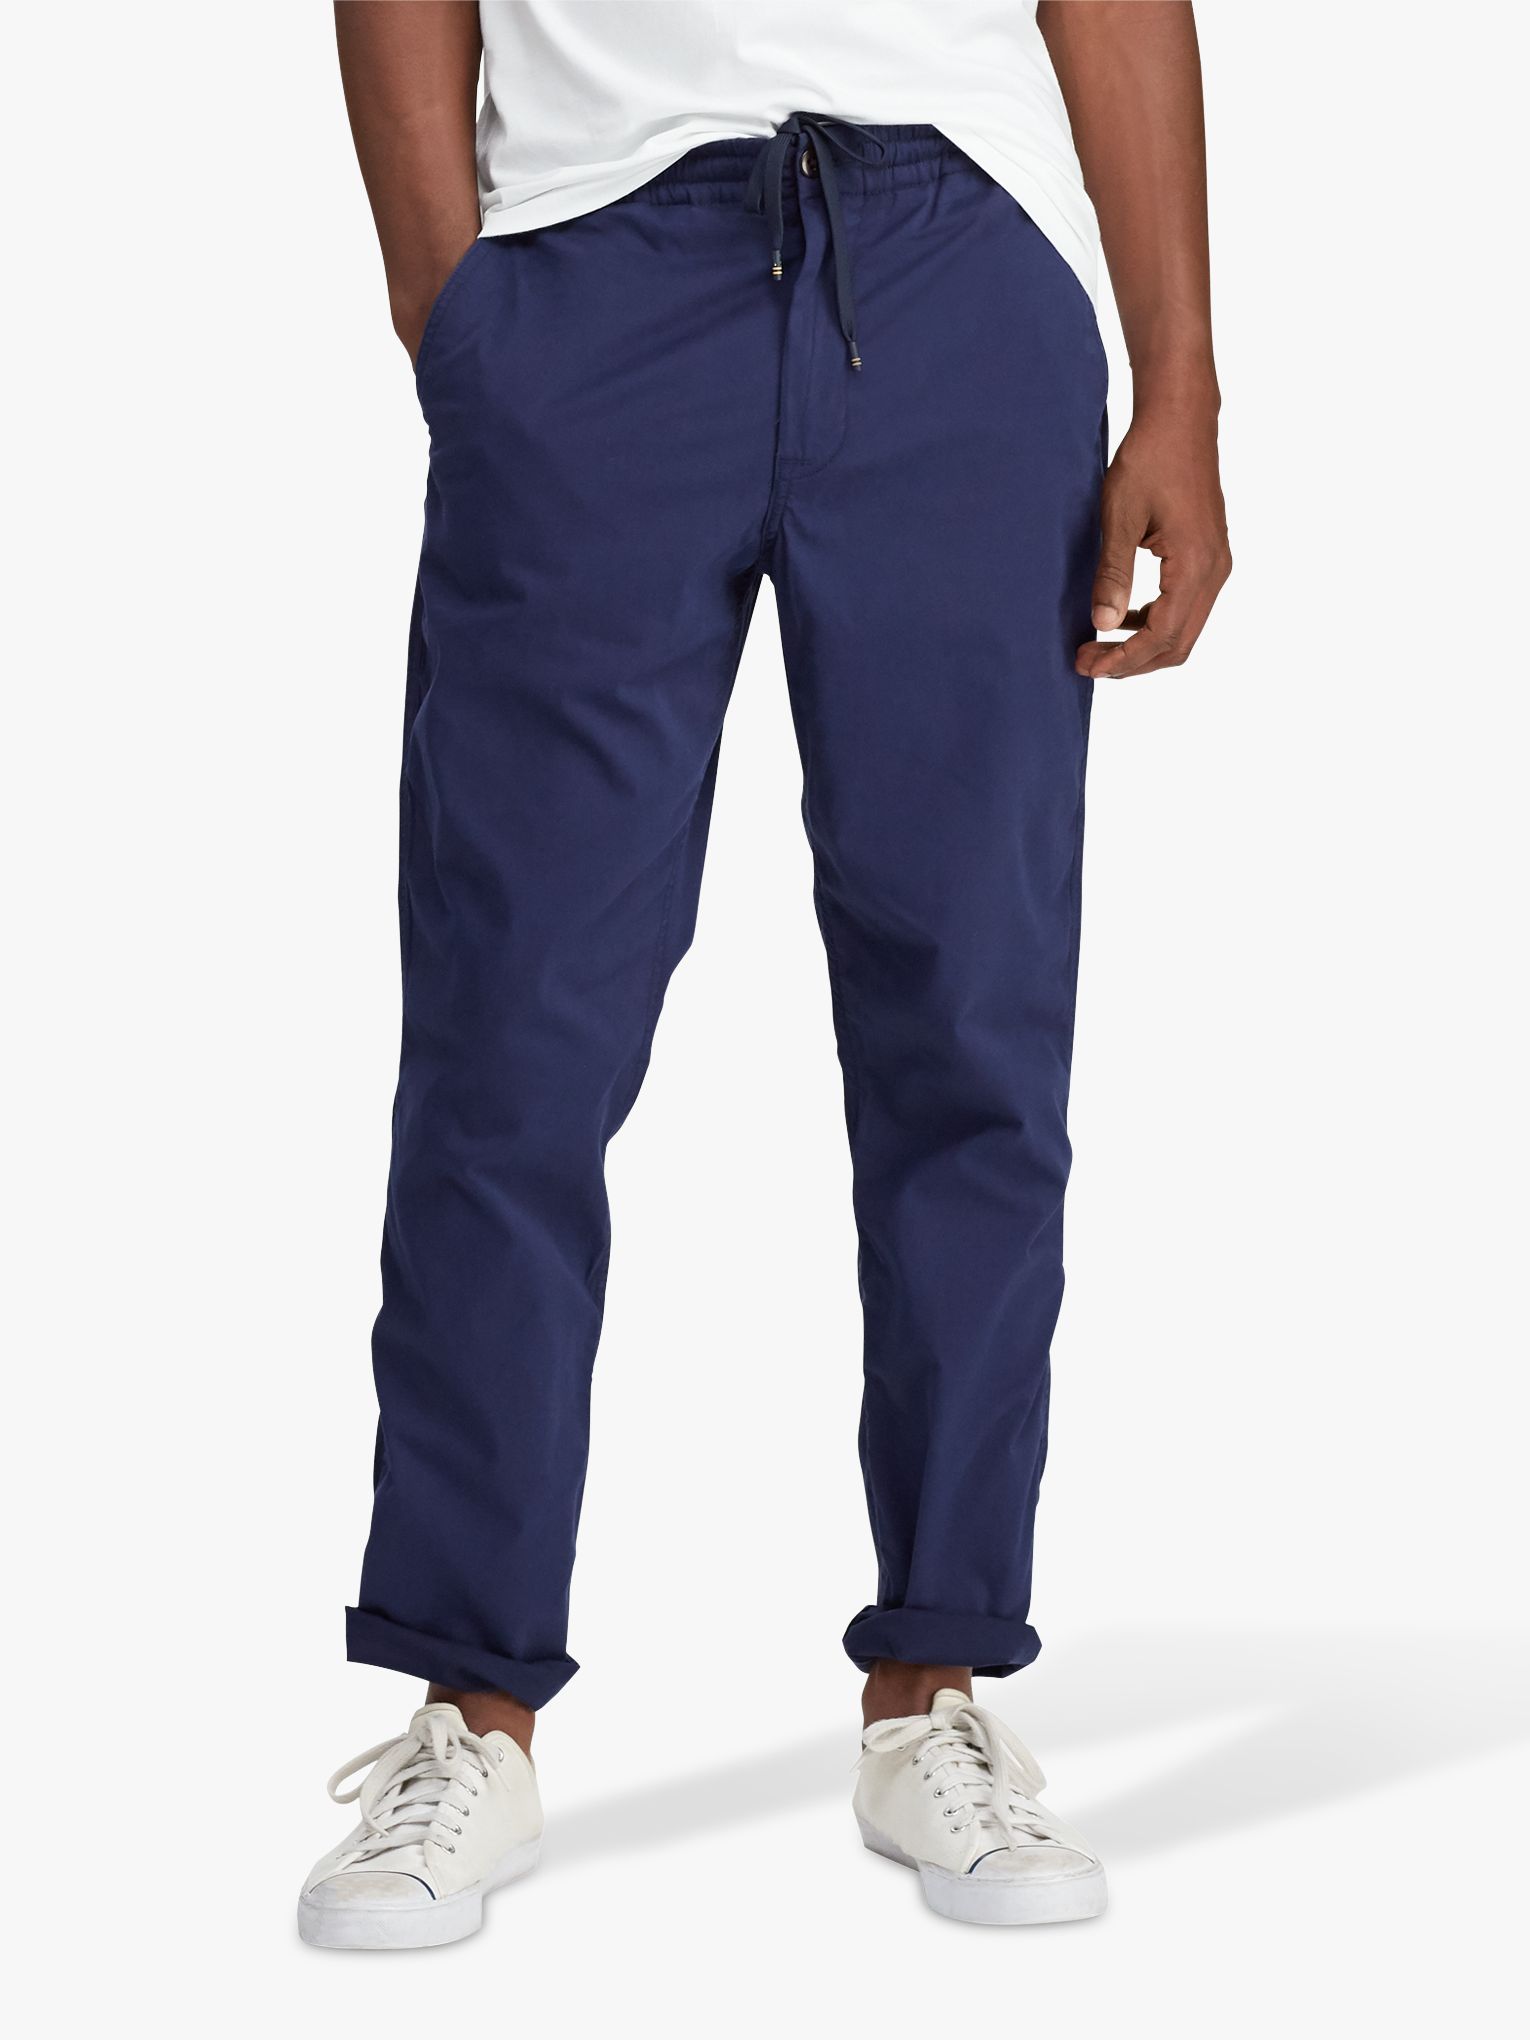 POLO RALPH LAUREN POLO PREPSTER TAILORED SLIM FIT PANT, Navy blue Men's  Casual Pants